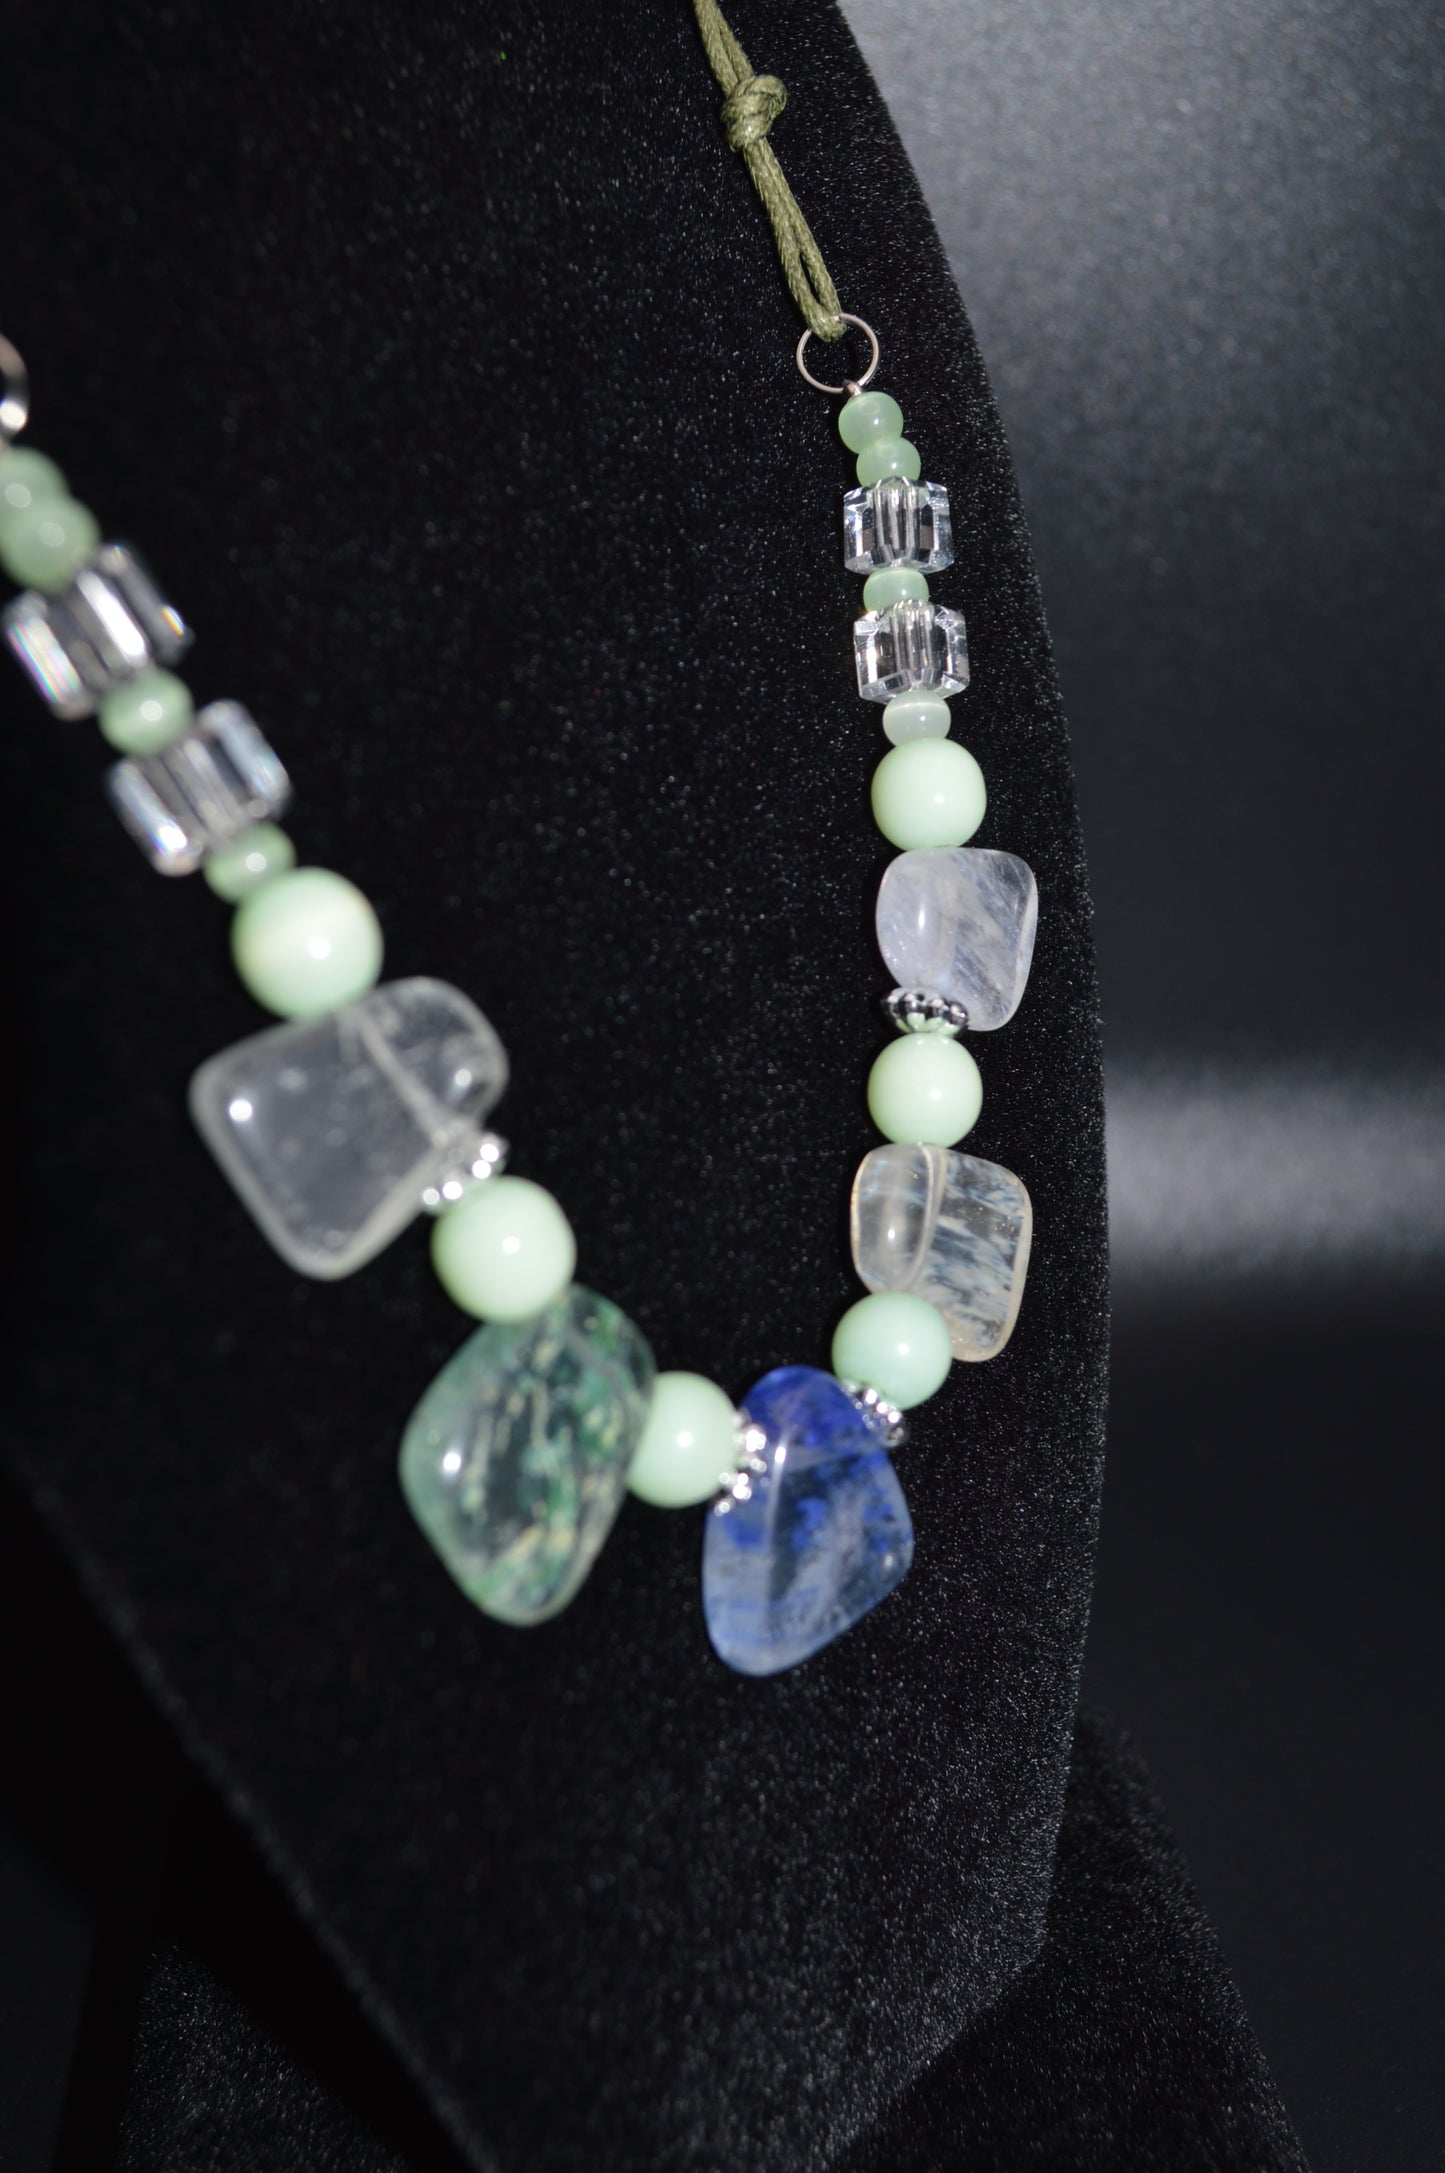 Blue and Green Stone Chip Necklace